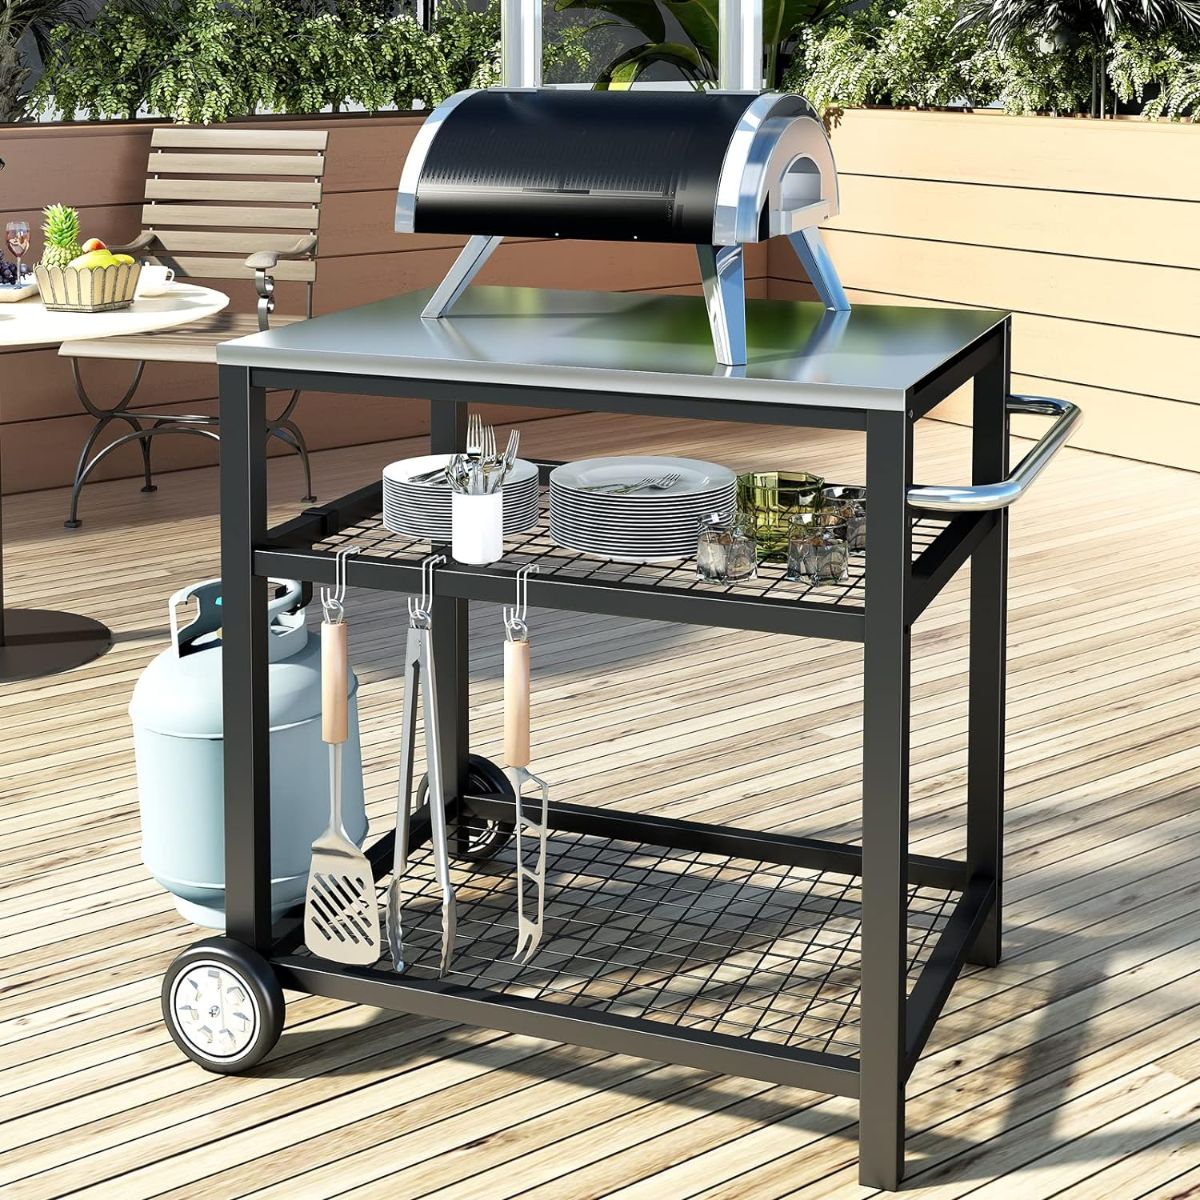 Movable Food Prep and Work Cart Stainless Steel Grill